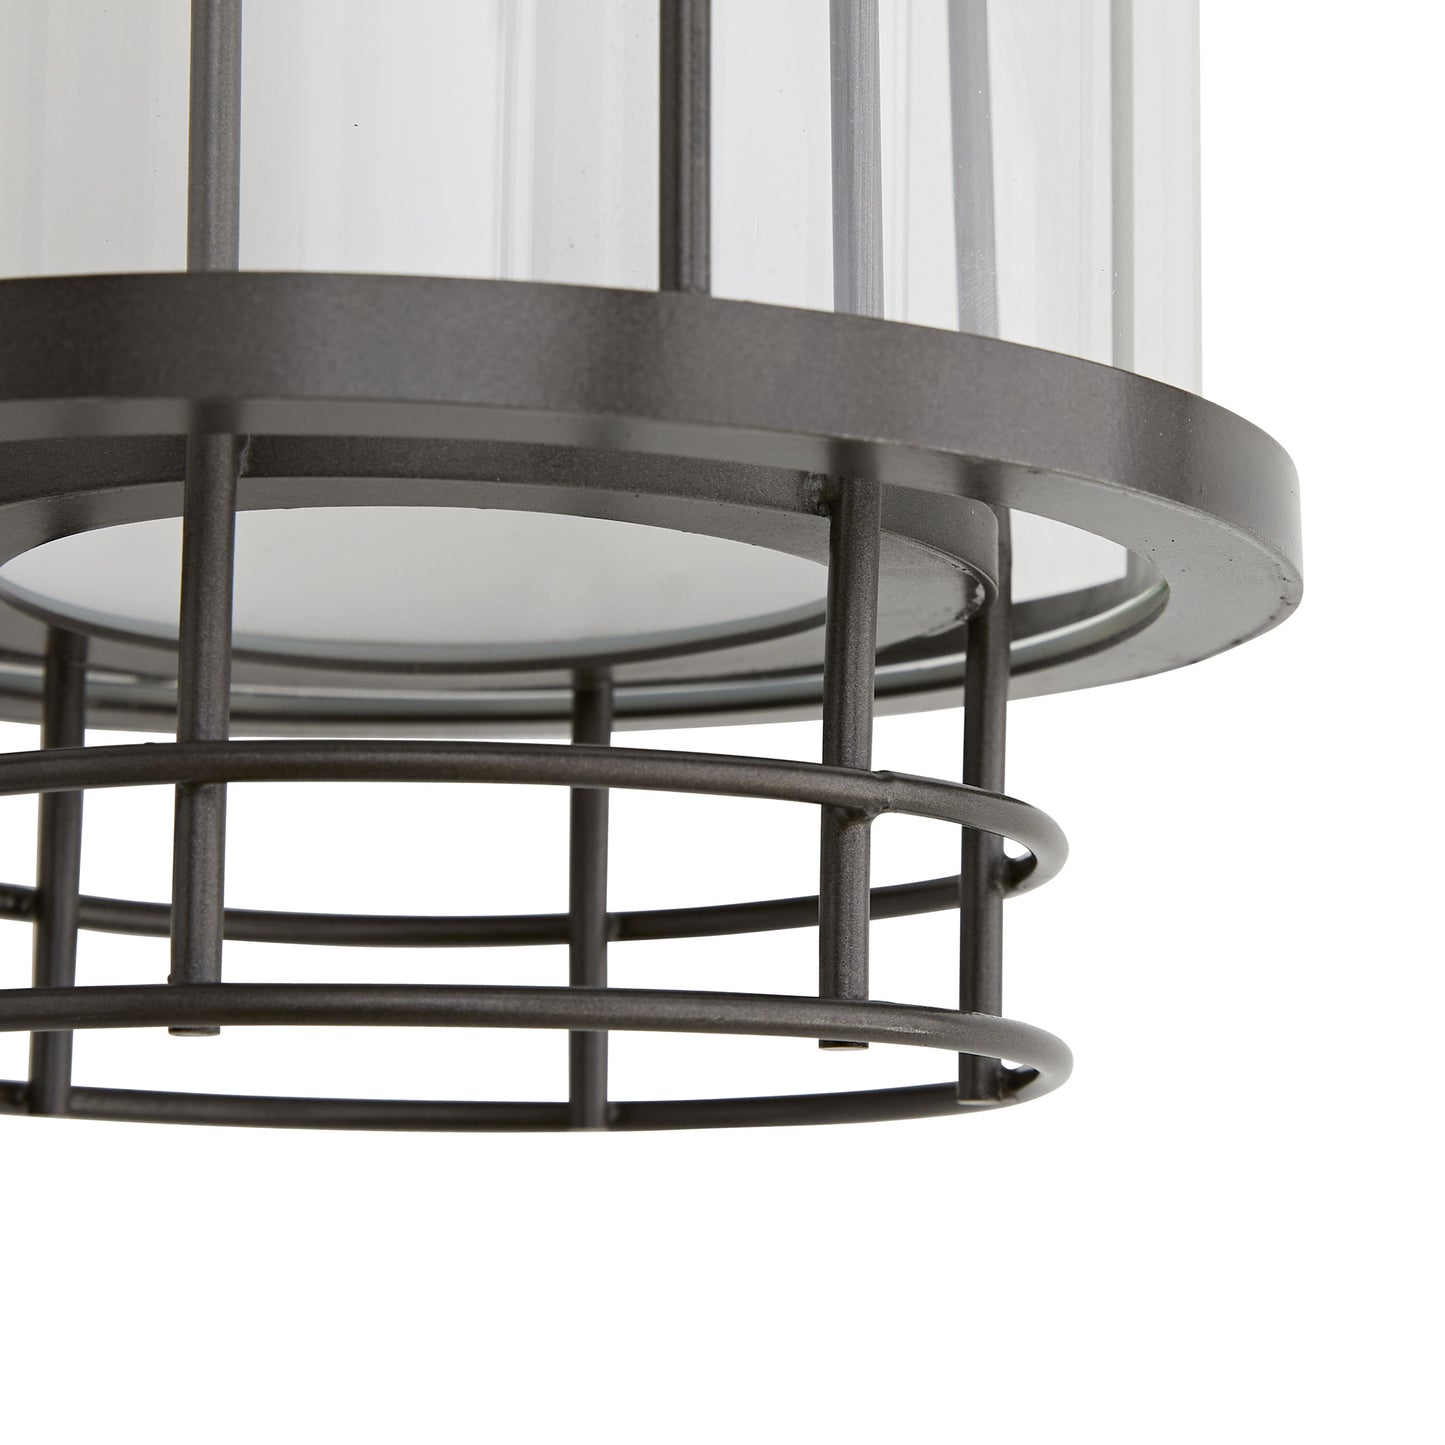 Evan Outdoor Sconce - Modern Lighting for Your Outdoor Spaces